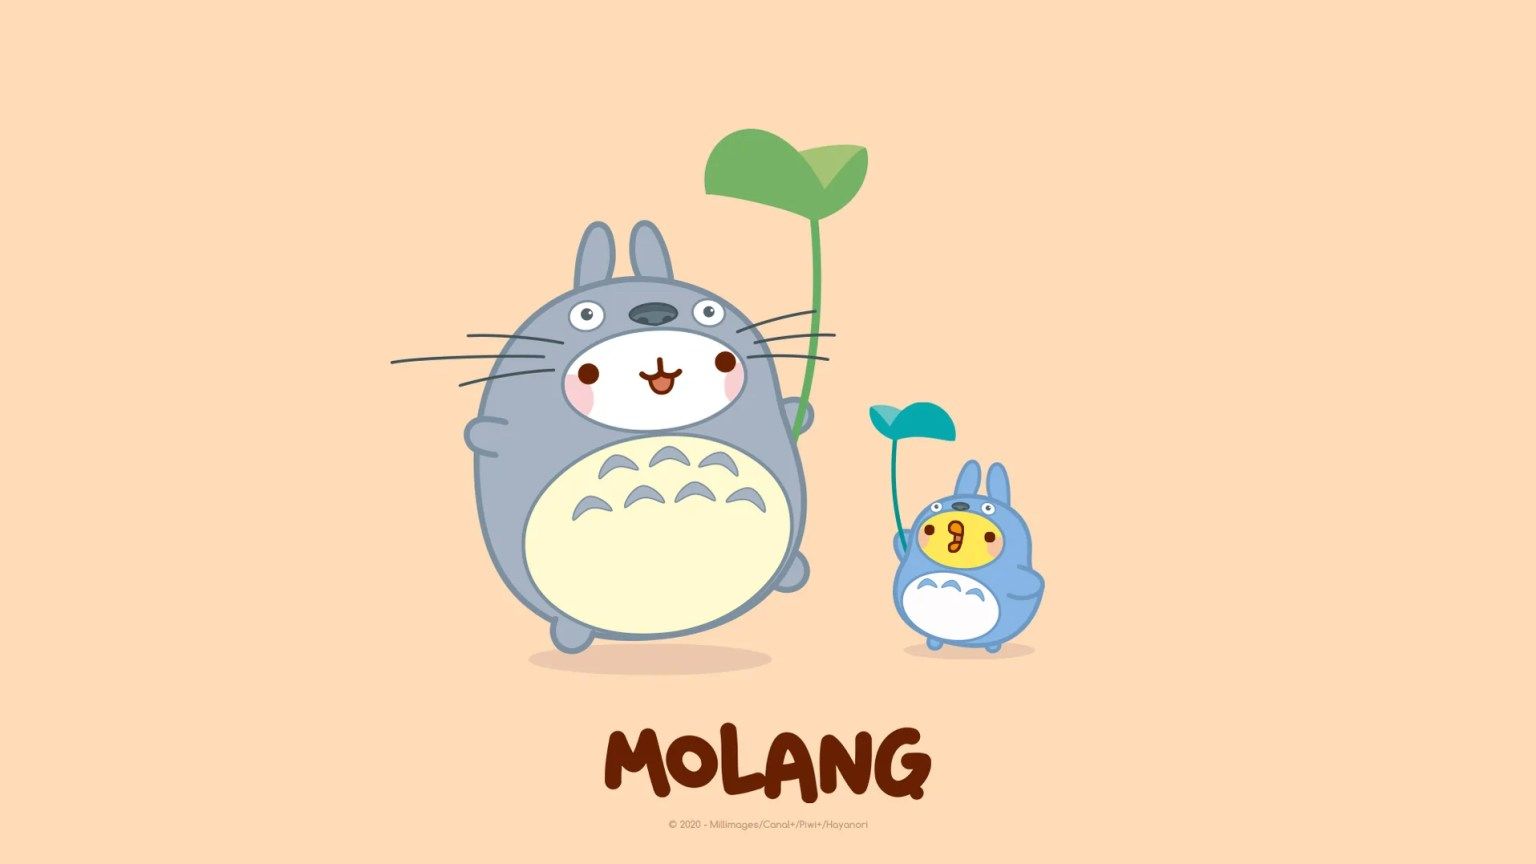 The best of anime wallpapers - Molang